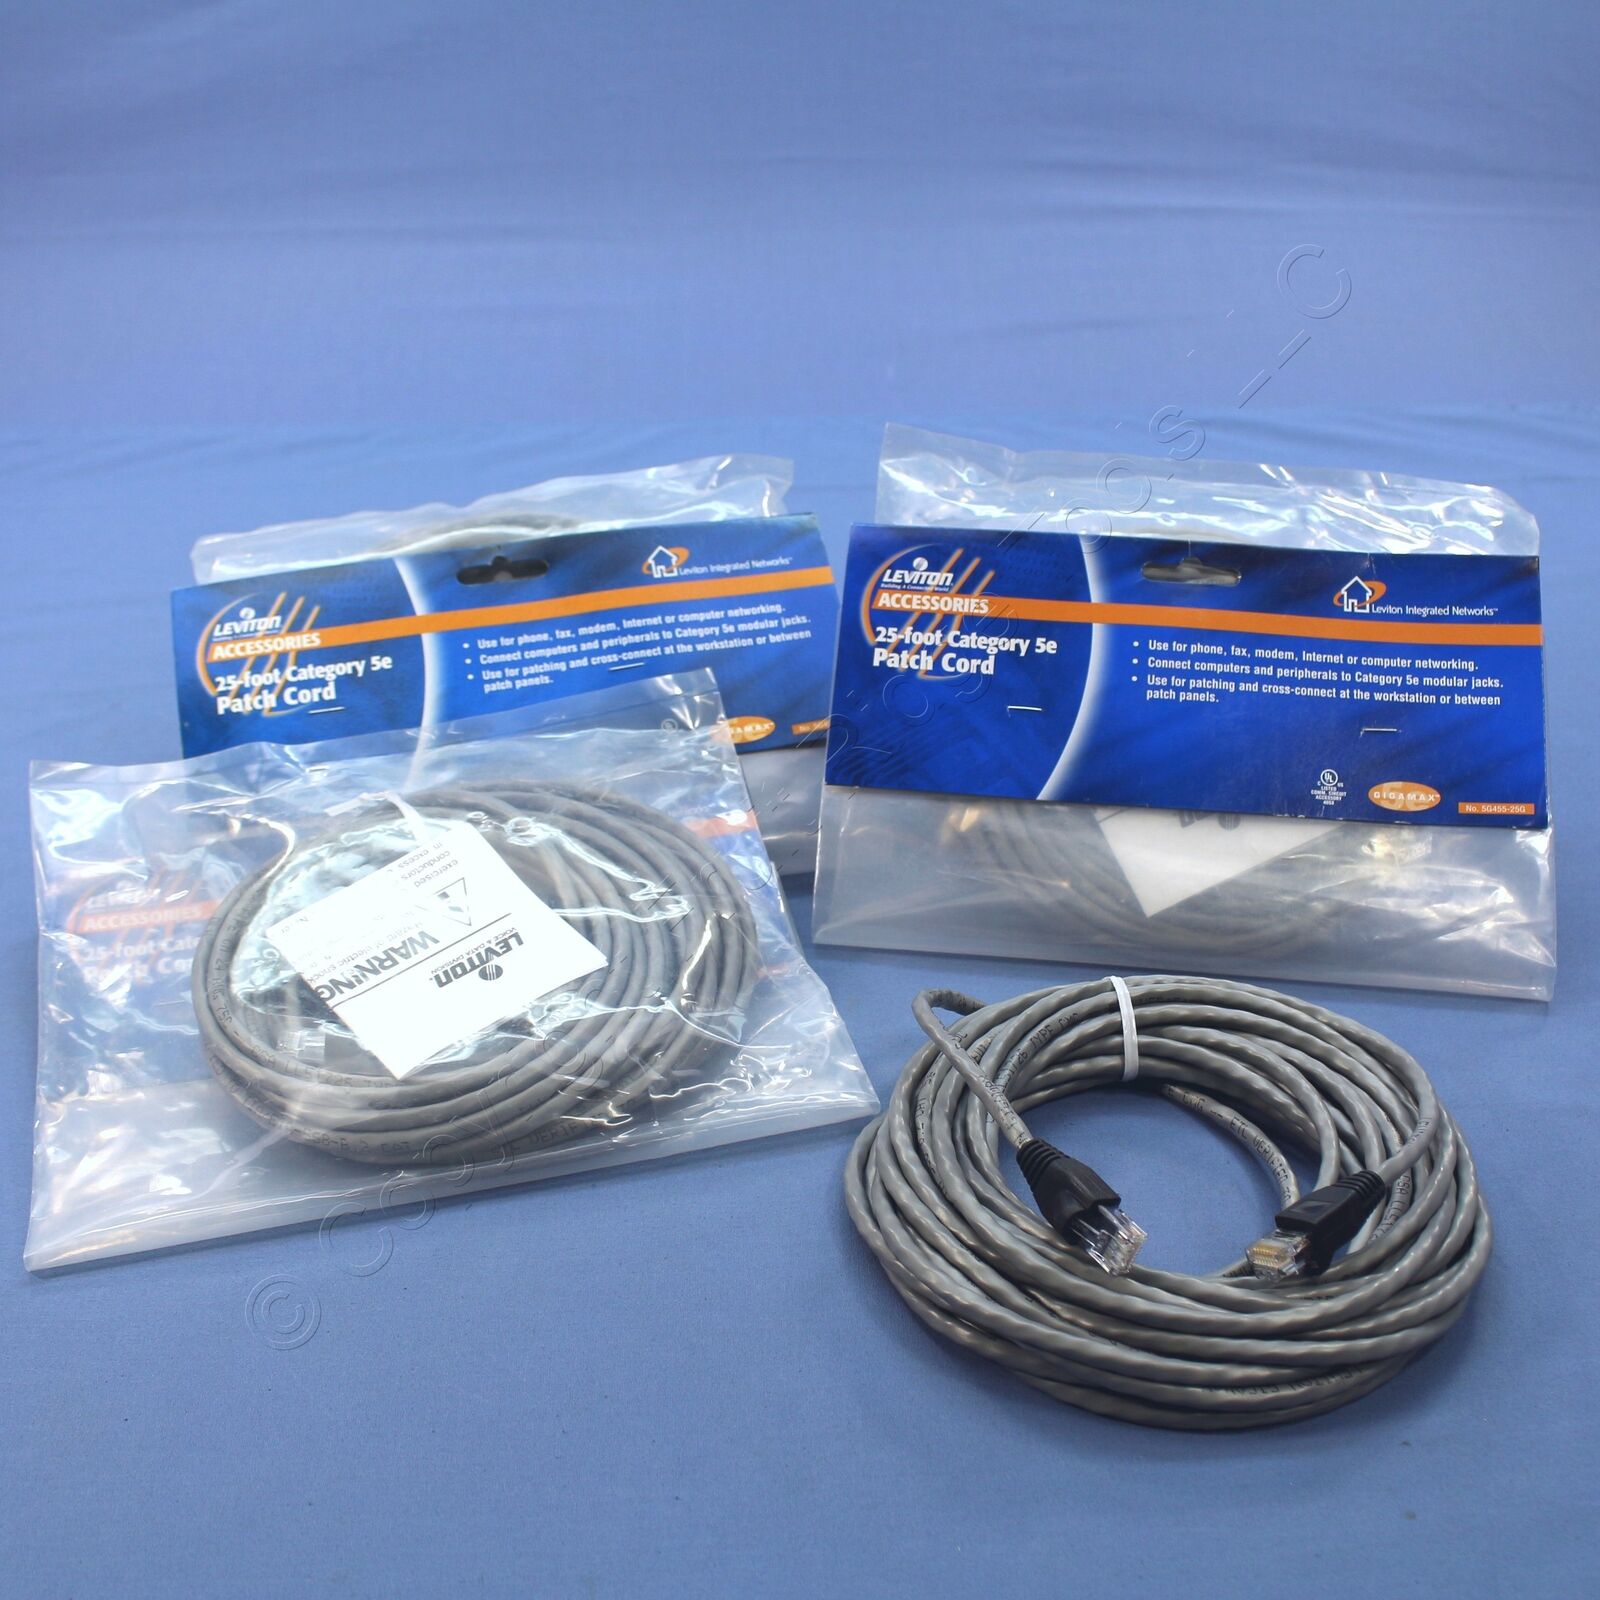 4 Leviton Gray Cat 5e 25 Ft Ethernet Patch Cords Network Cables Booted 5G455-25G